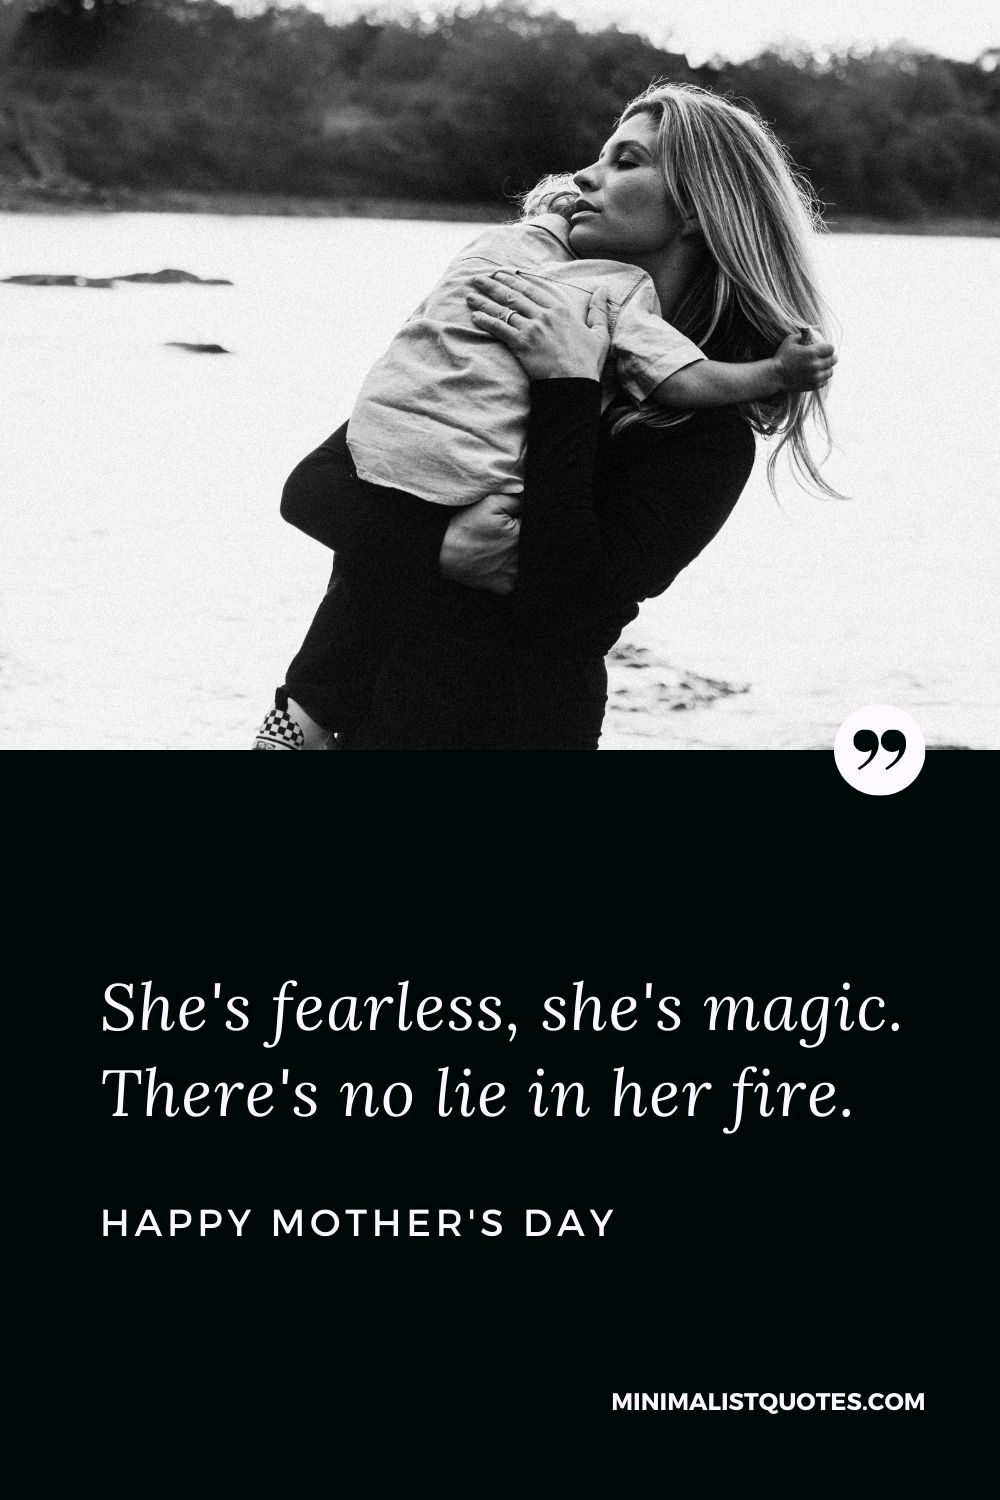 Mother's Day wishes, messages & quotes: She's fearless, she's magic. There's no lie in her fire. Happy Mother's Day!